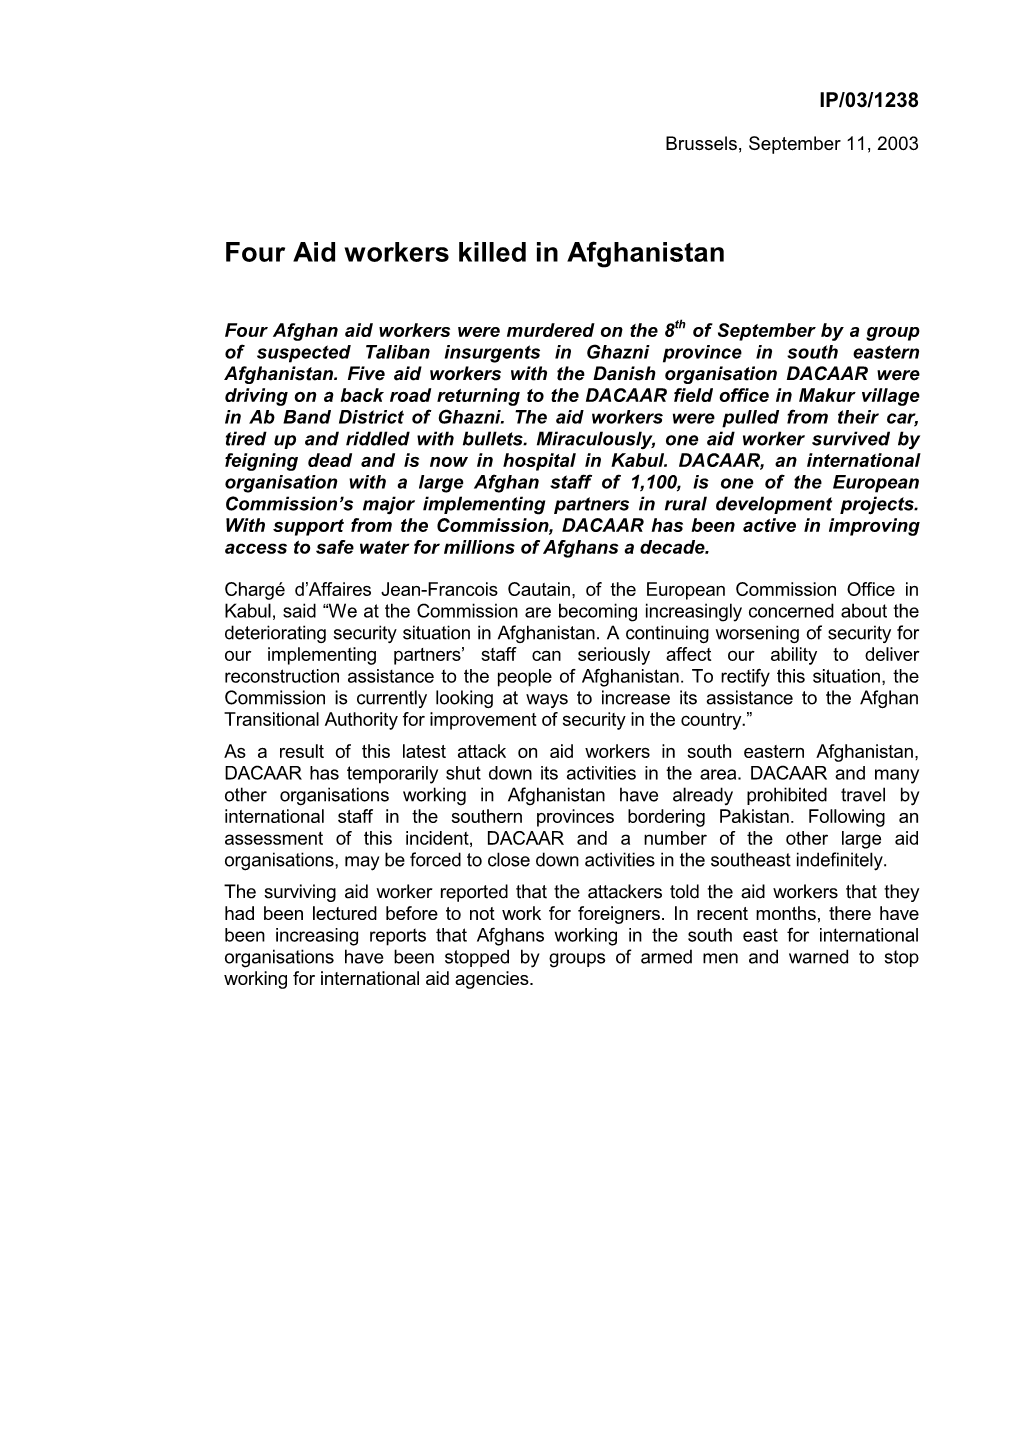 Four Aid Workers Killed in Afghanistan